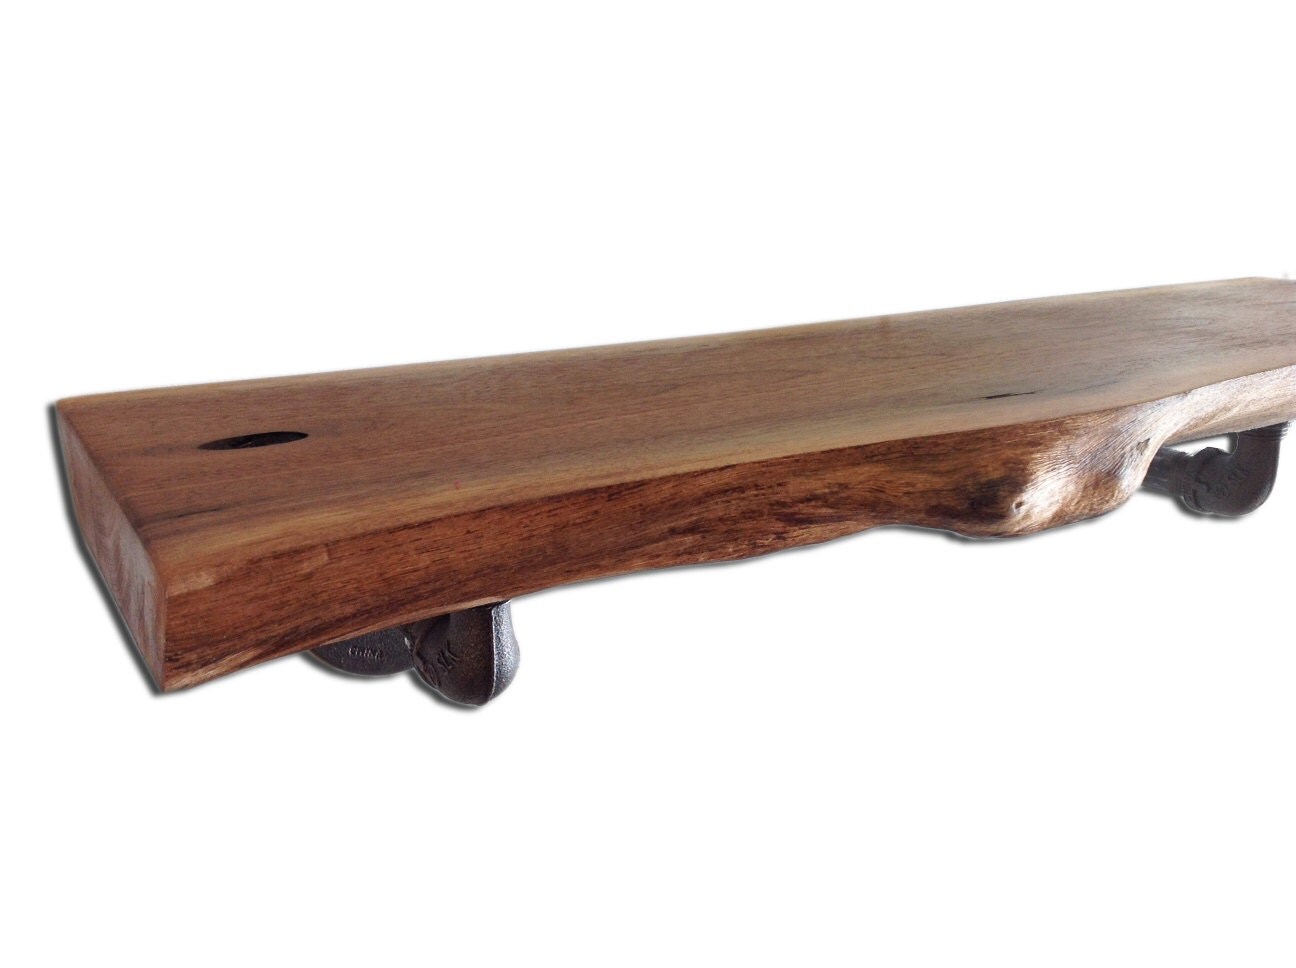 Thick black walnut Live Edge Wall Shelf with industrial interior decor pictures, interior decor home, interior decor room, interior decor of house, interior design images, and interior design rooms Live Edge Wood Shelves 968 x 1296